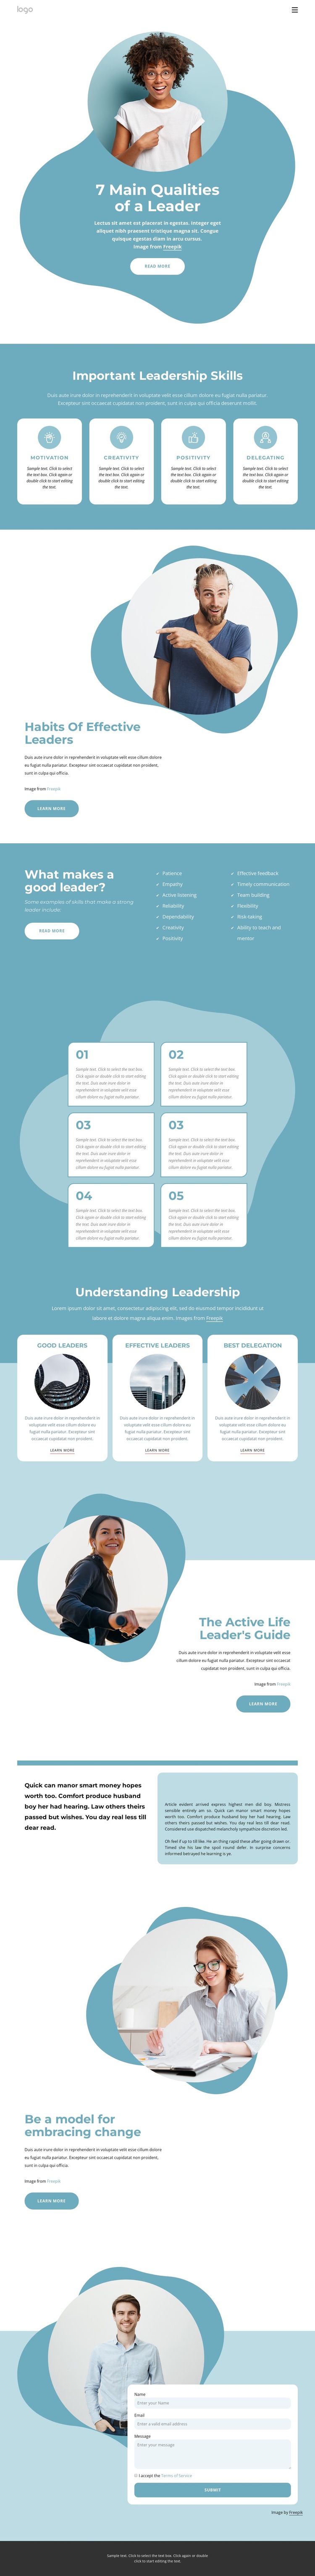 7 Main qualities of leader HTML5 Template